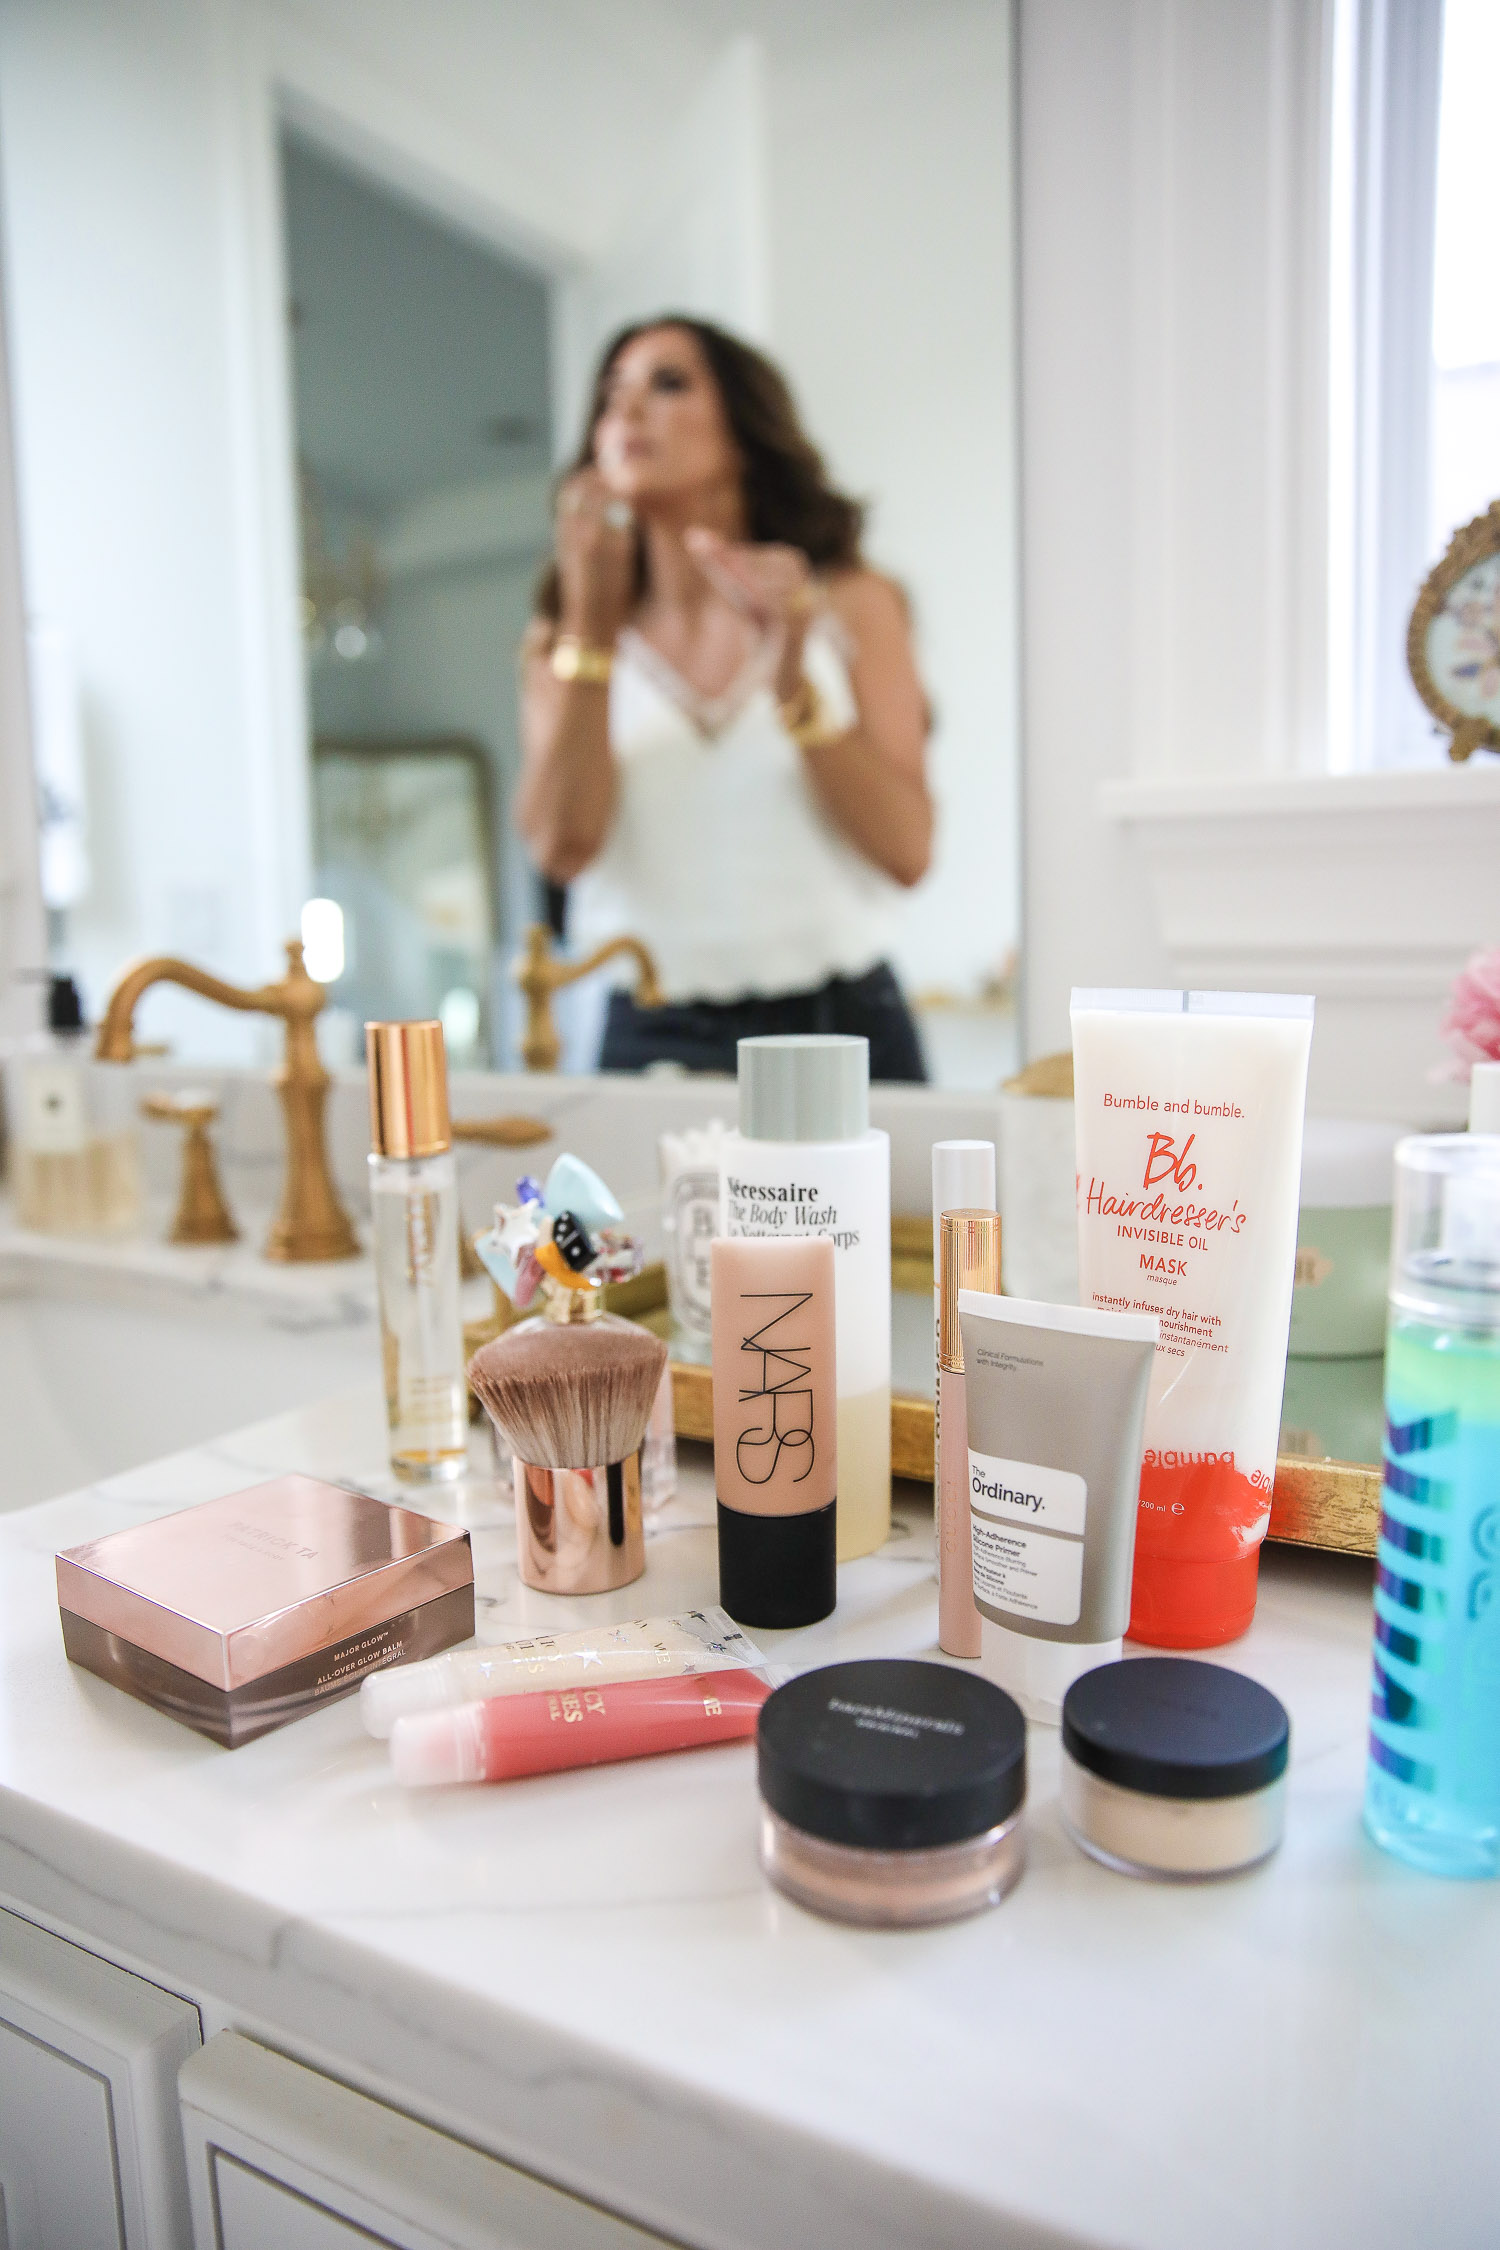 Sephora Favorites by popular US beauty blog, The Sweetest Thing: image of Nars foundation, The Ordinary primer, Bare Minerals powder, Milk makeup setting spray, lip gloss, and powder brush on a marble bathroom vanity counter. 